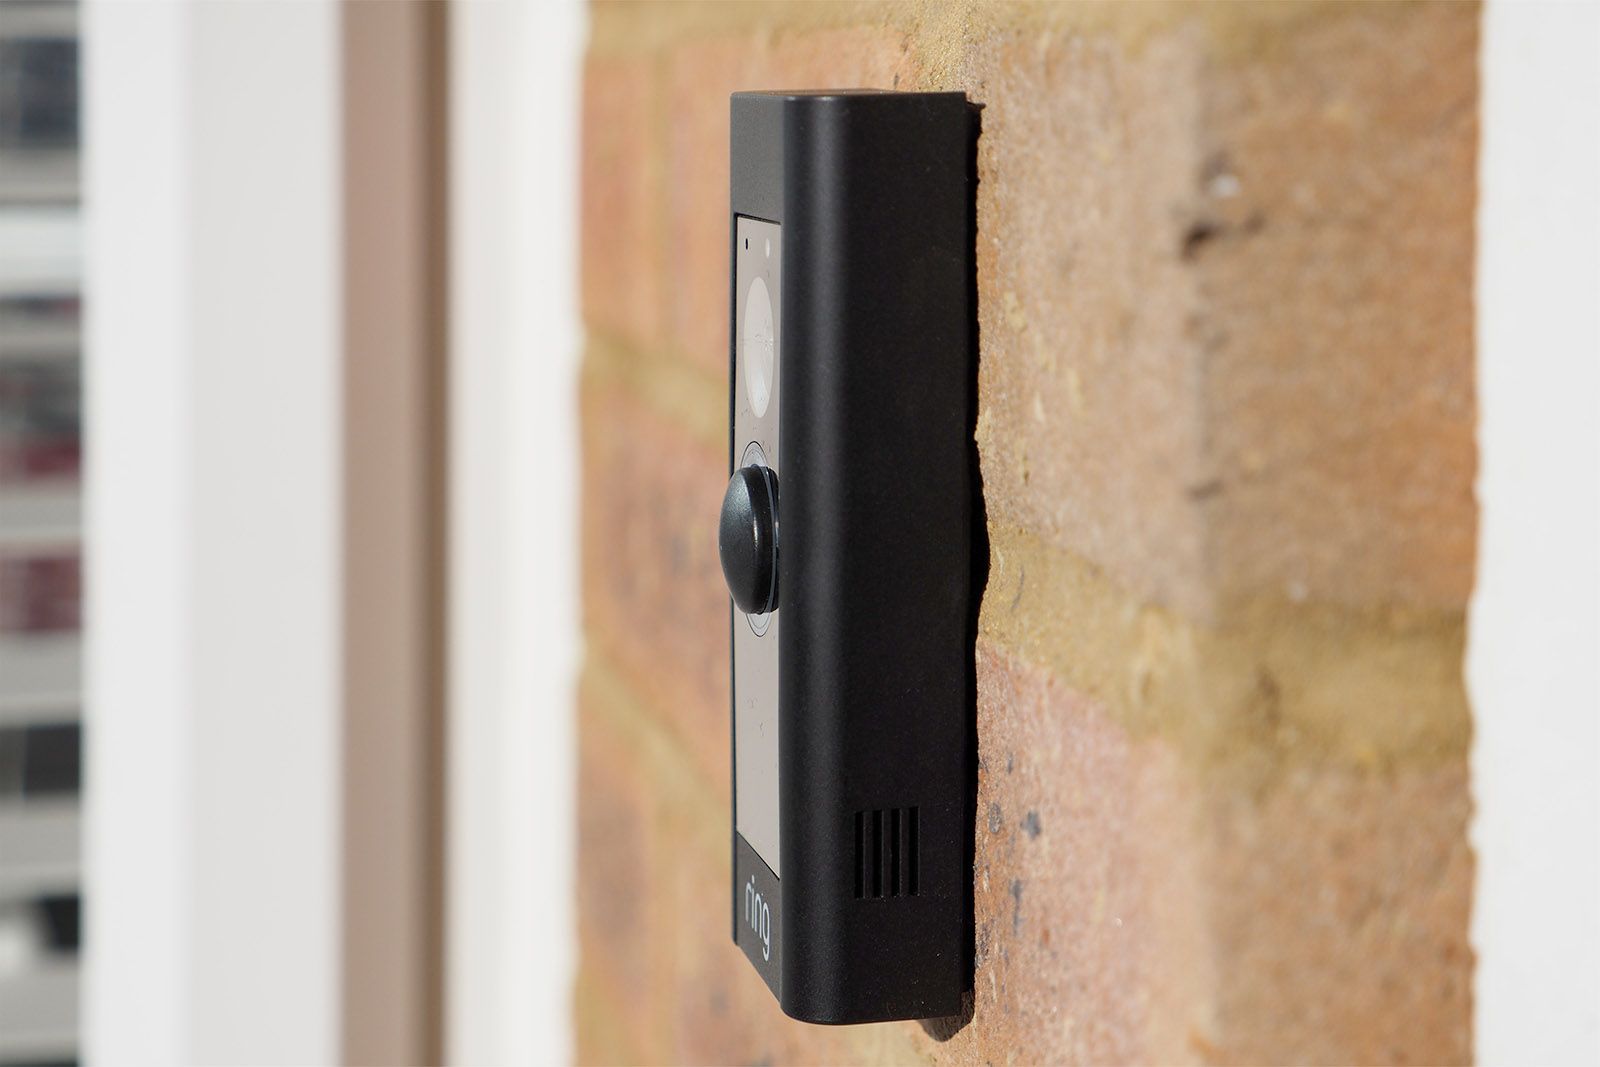 Ring Video Doorbell Pro Hardwired review photo 4